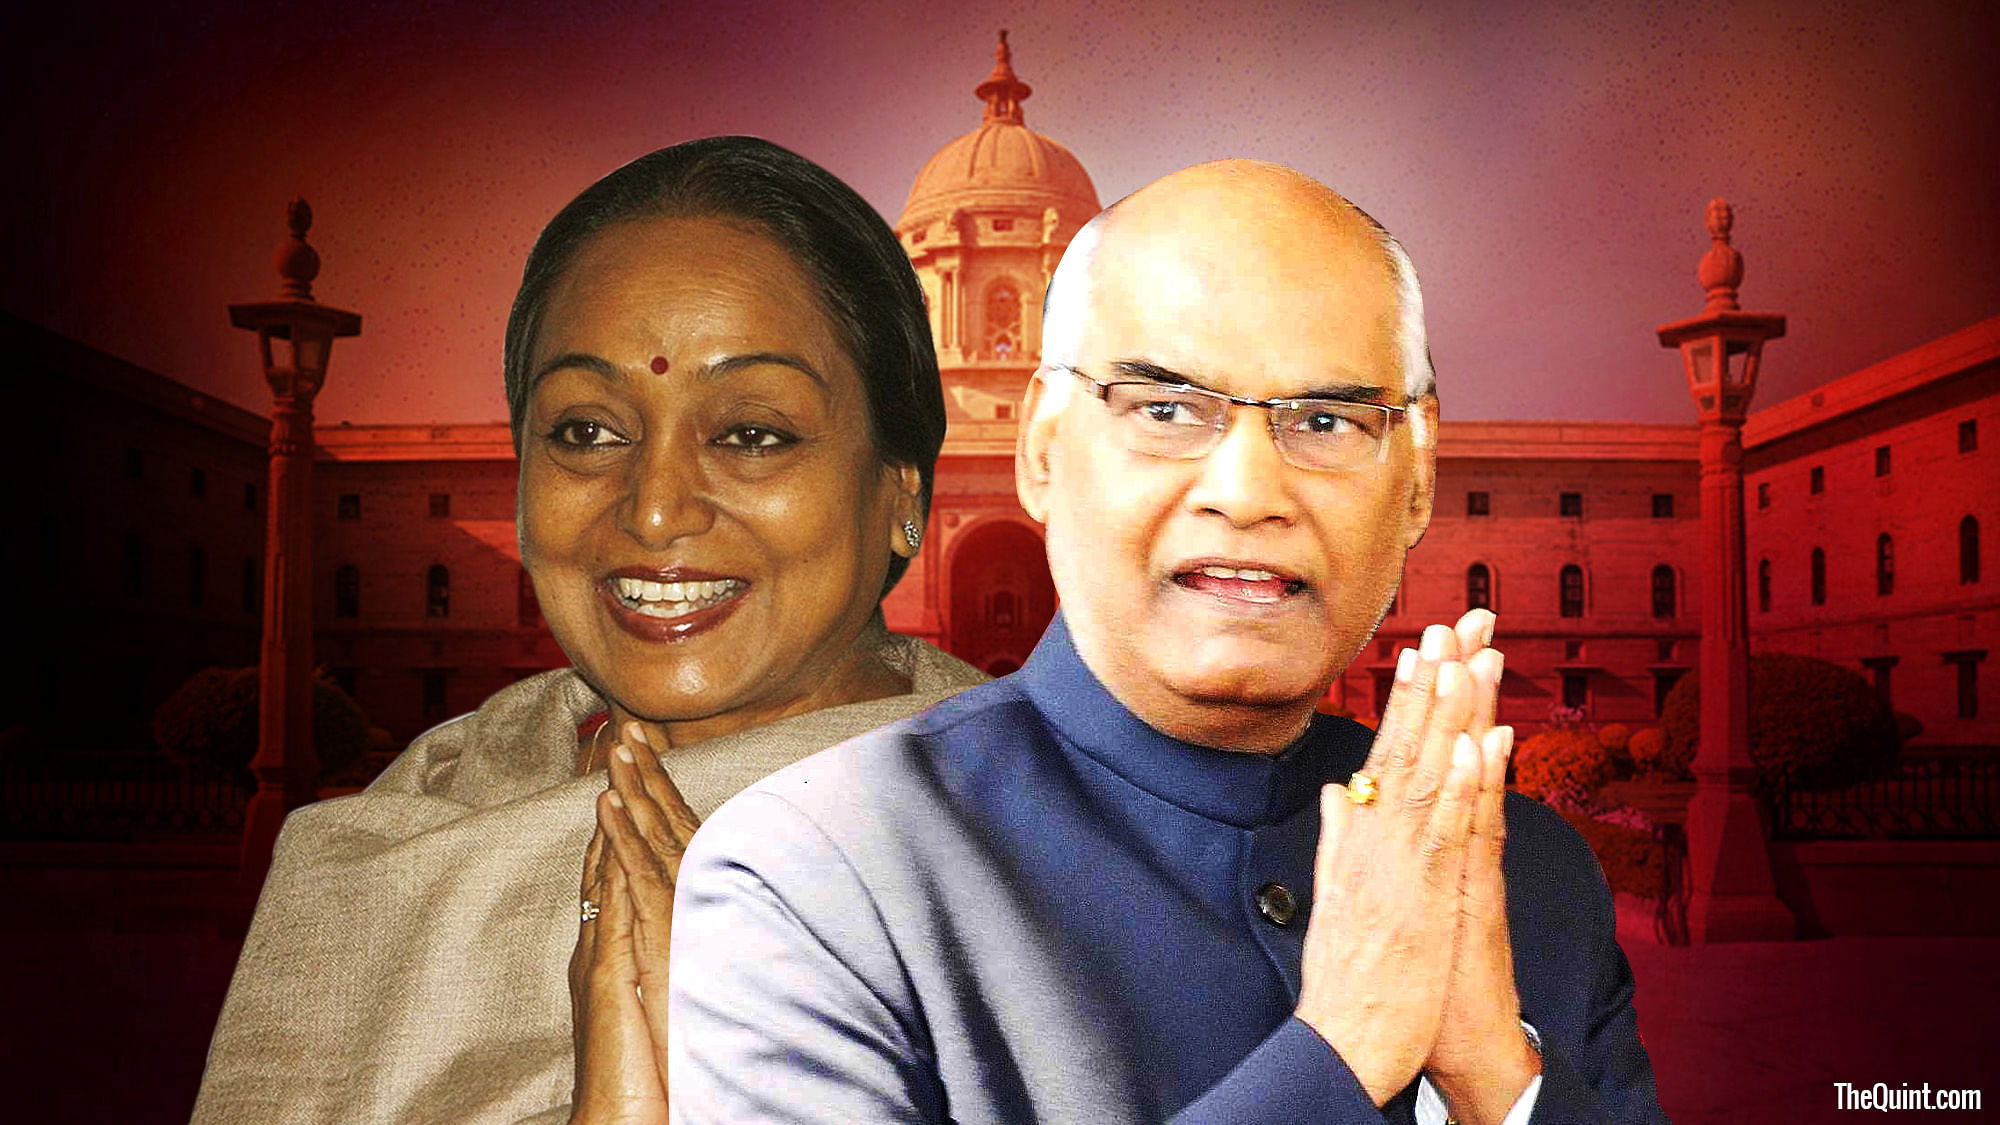 It’s Dalit versus Dalit in the race to Rashtrapati Bhavan as the Congress-led Opposition parties chose former Lok Sabha speaker Meira Kumar as their nominee. (Photo: <b>The Quint</b>)